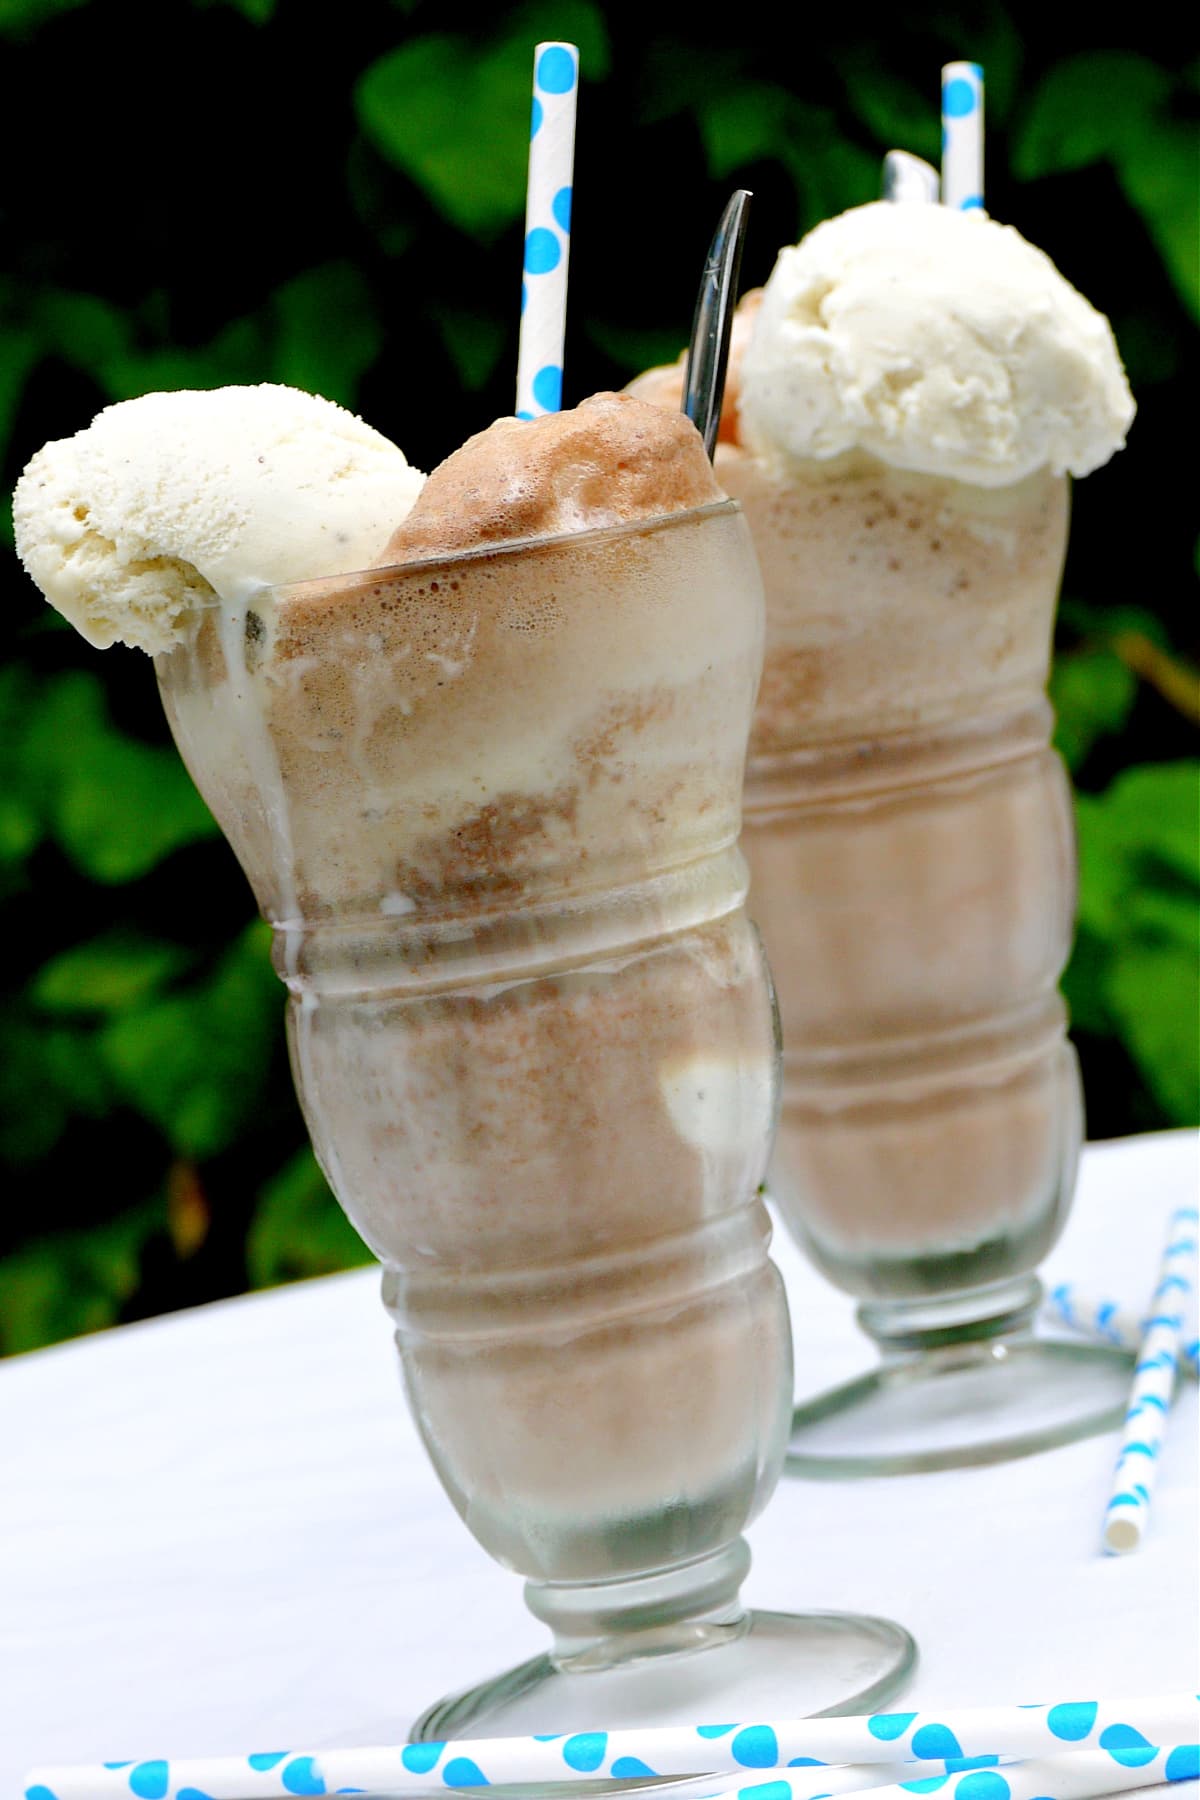 Close-up of two large, tall glasses filled with chocolate ice cream sodas.